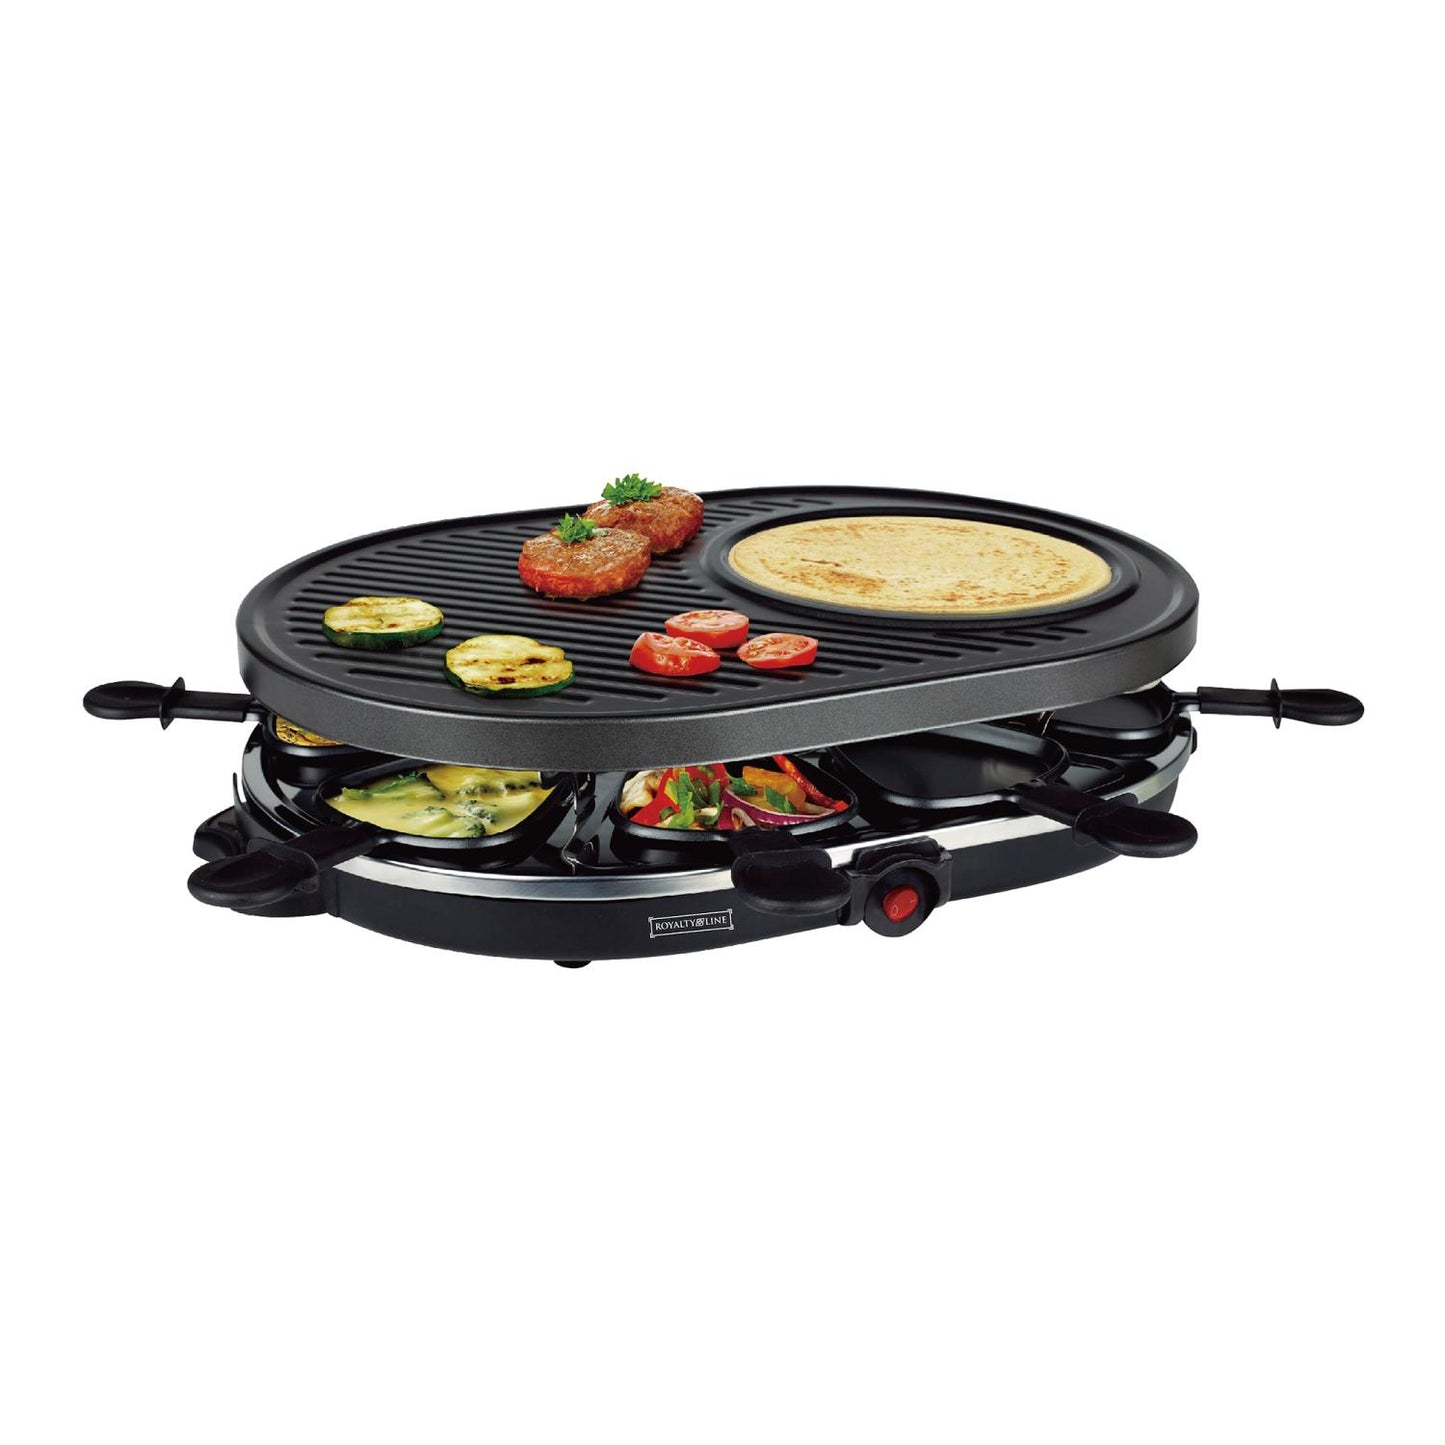 Royalty Line 2 in 1 Electric Grill with 8 Pieces Raclette